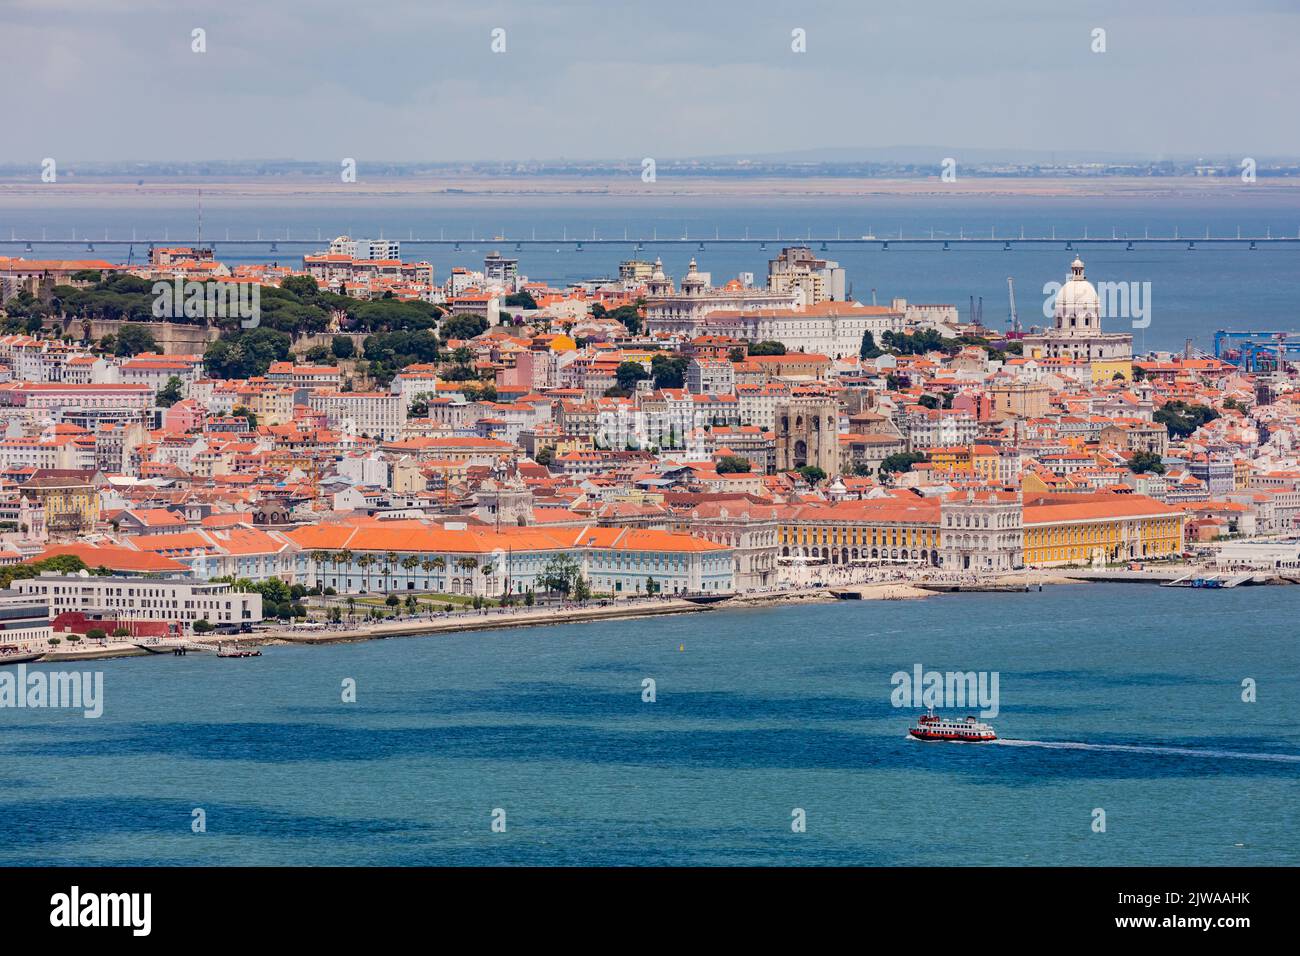 Panorama of Lisbon Old Town seen from the viewpoint at Cristo Rei, Lisbon, Portugal Stock Photo